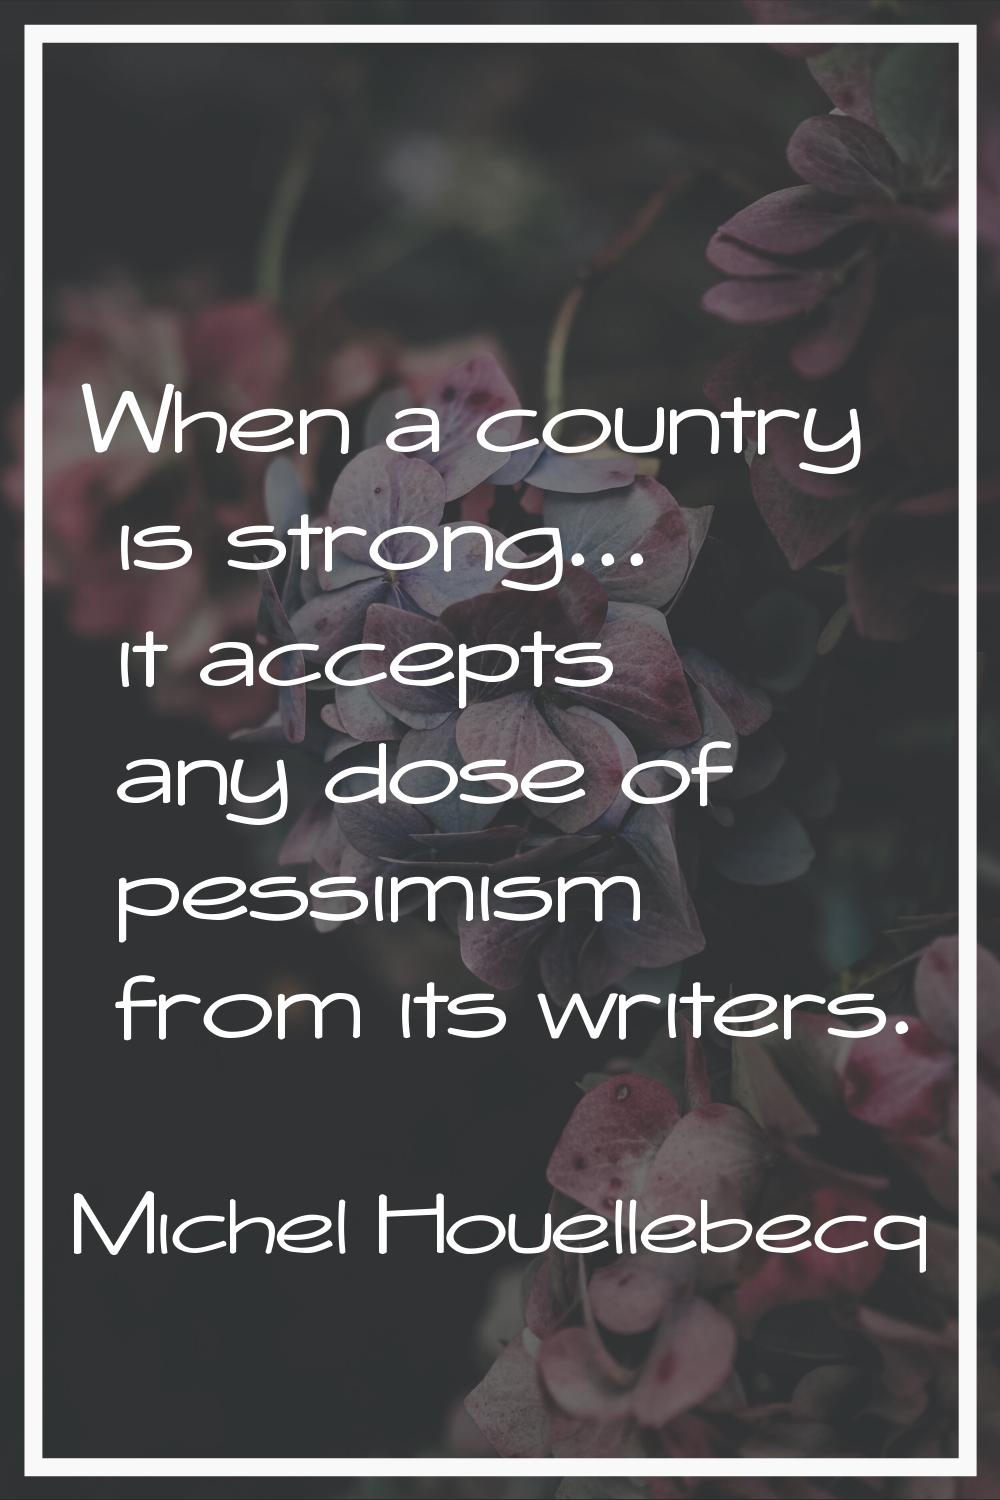 When a country is strong... it accepts any dose of pessimism from its writers.